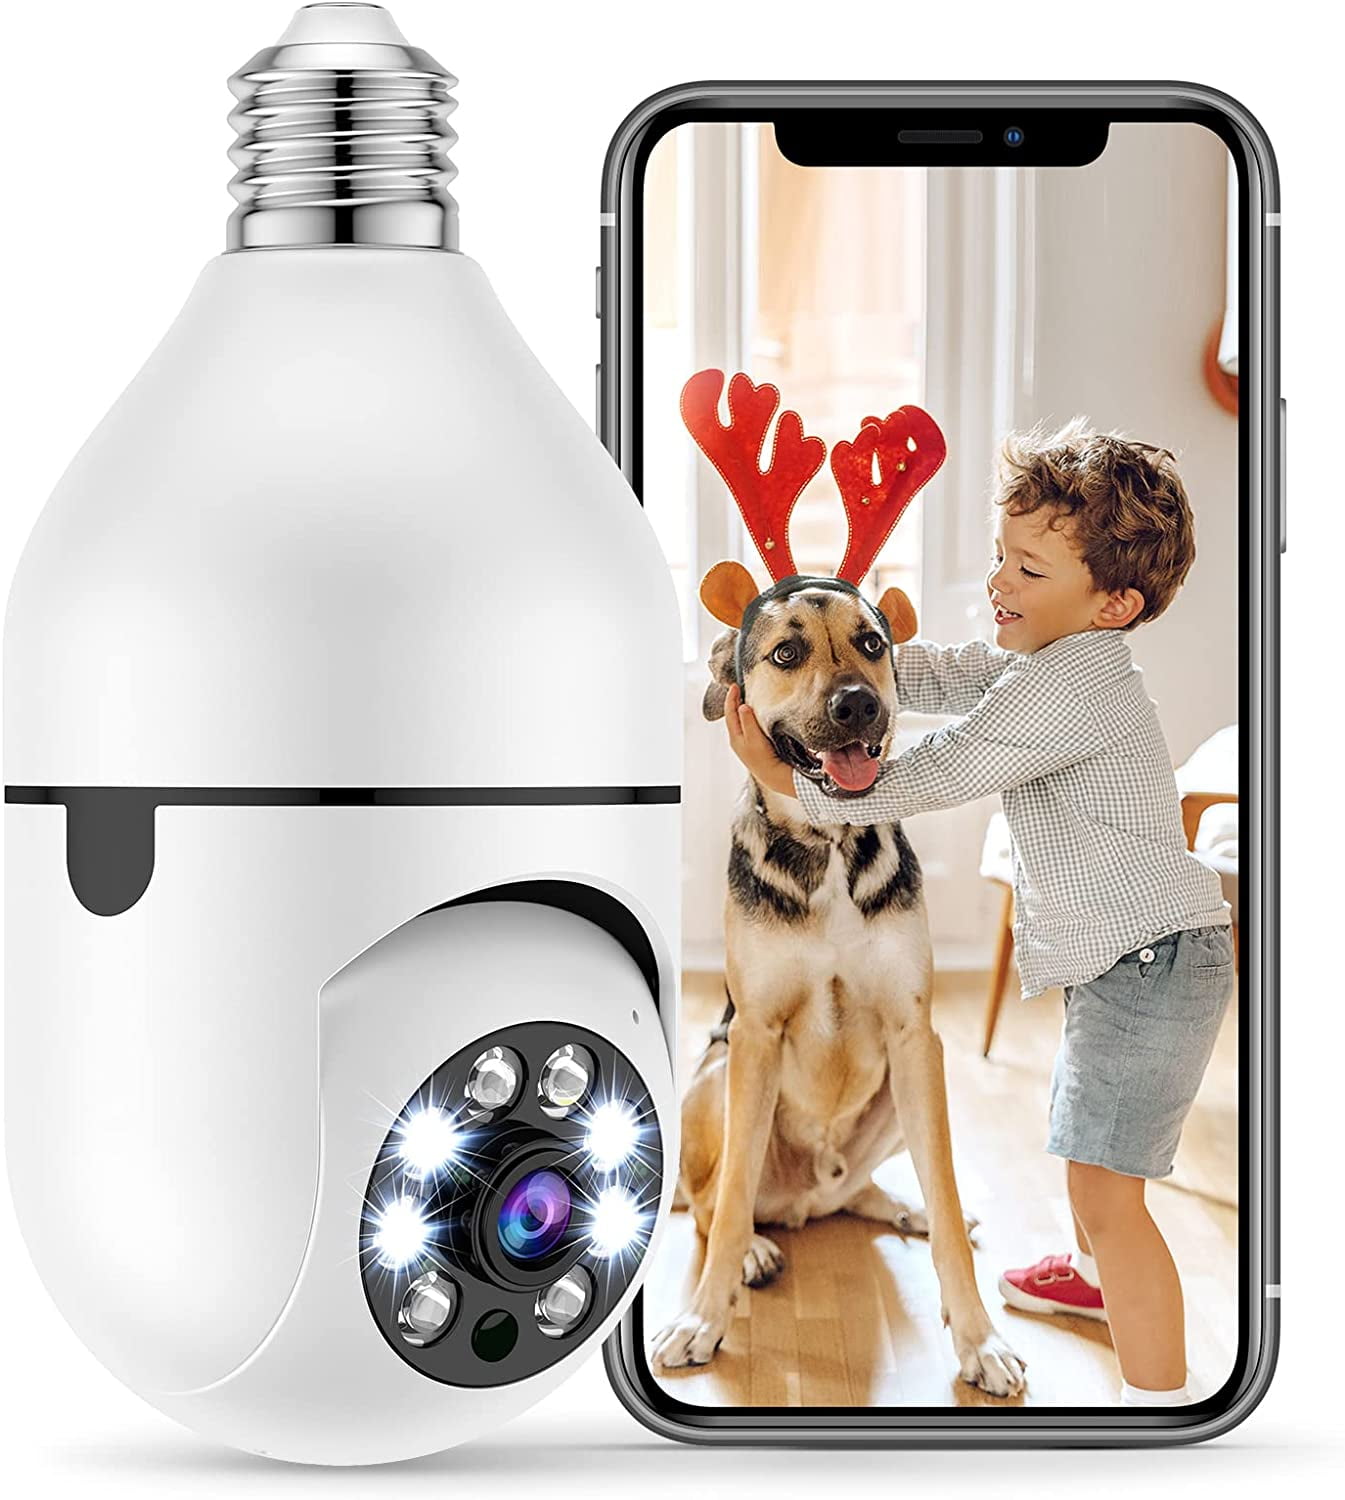 1080P E27 Bulb Camera 360 Degree Panoramic Wireless Home Surveillance Cameras Smart Motion Detection and Alarm Night Vision Light Bulb Camera WiFi Outdoor Two Way Audio 